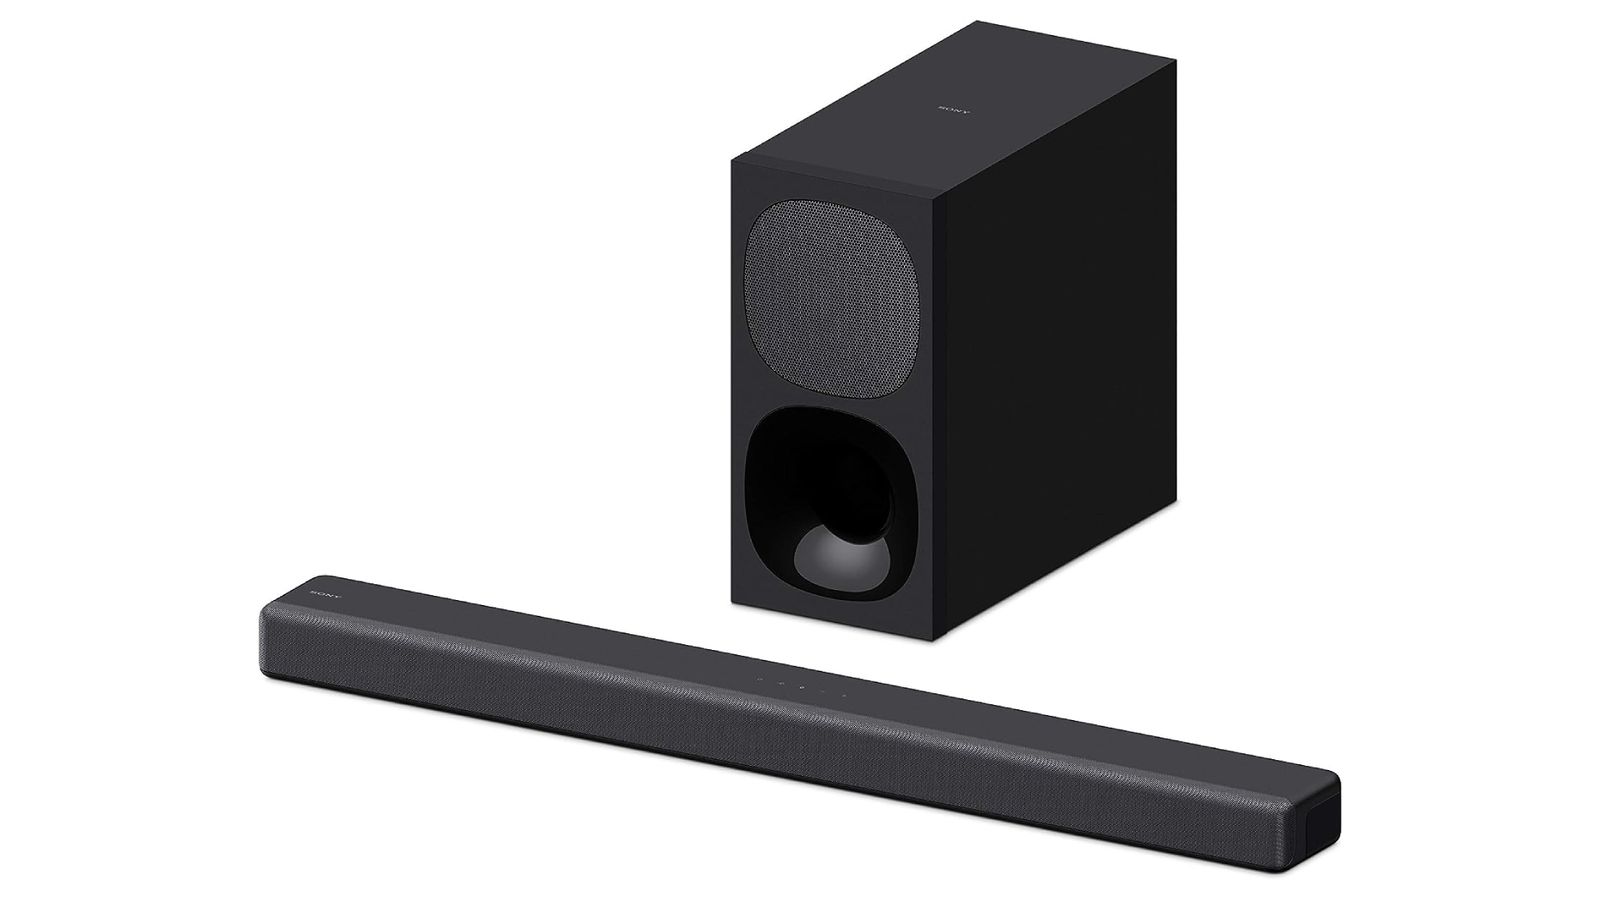 Sony HT-G700 product image of a long black soundbar in front of a black speaker.